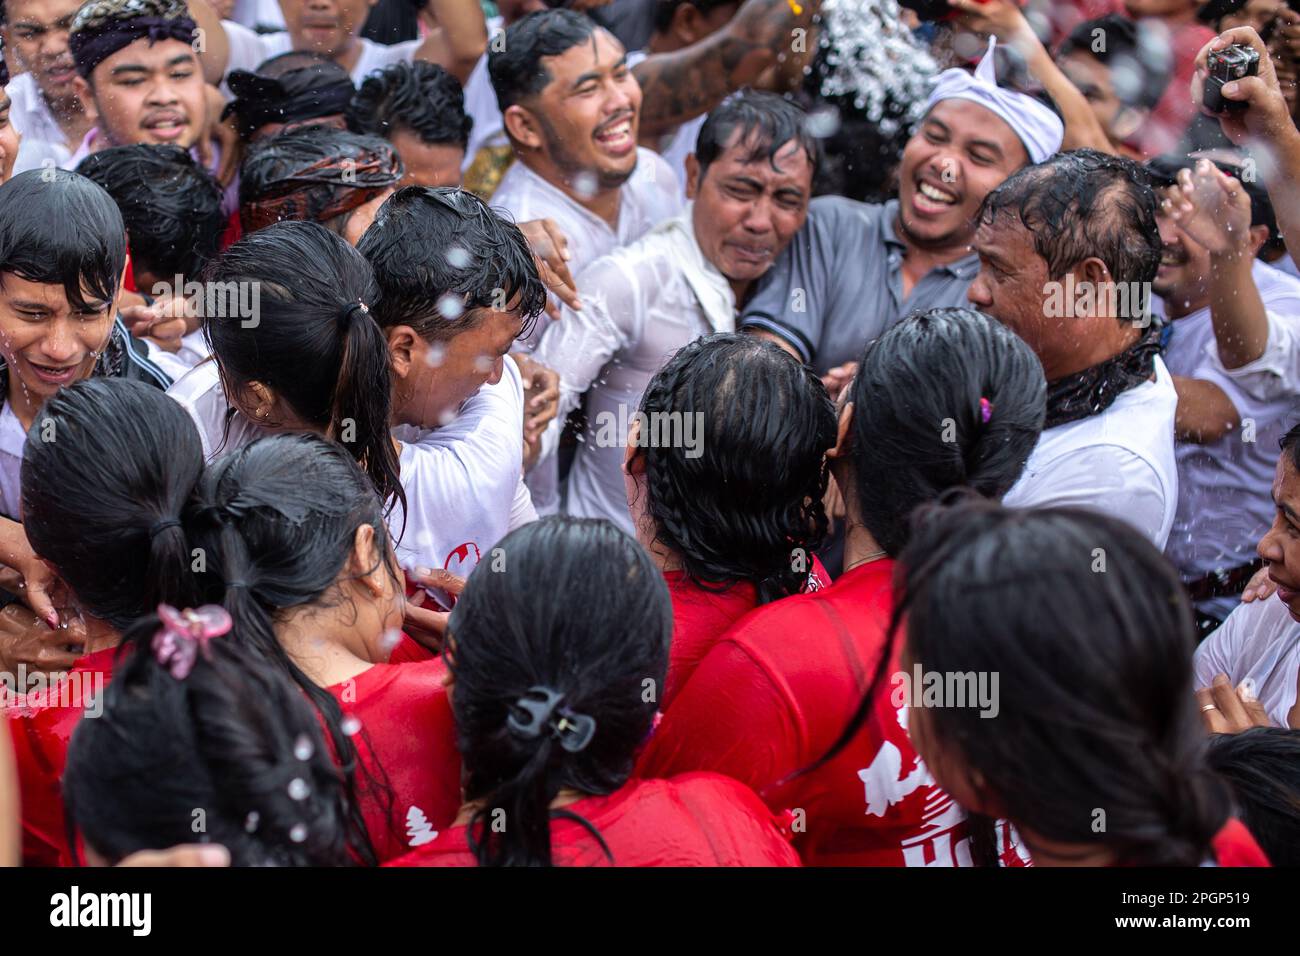 Denpasar, Bali, Indonesia - March 23, 2023: Omed-Omedan festival also known as The Kissing Ritual on the streets of Denpasar, Bali, Indonesia. Stock Photo